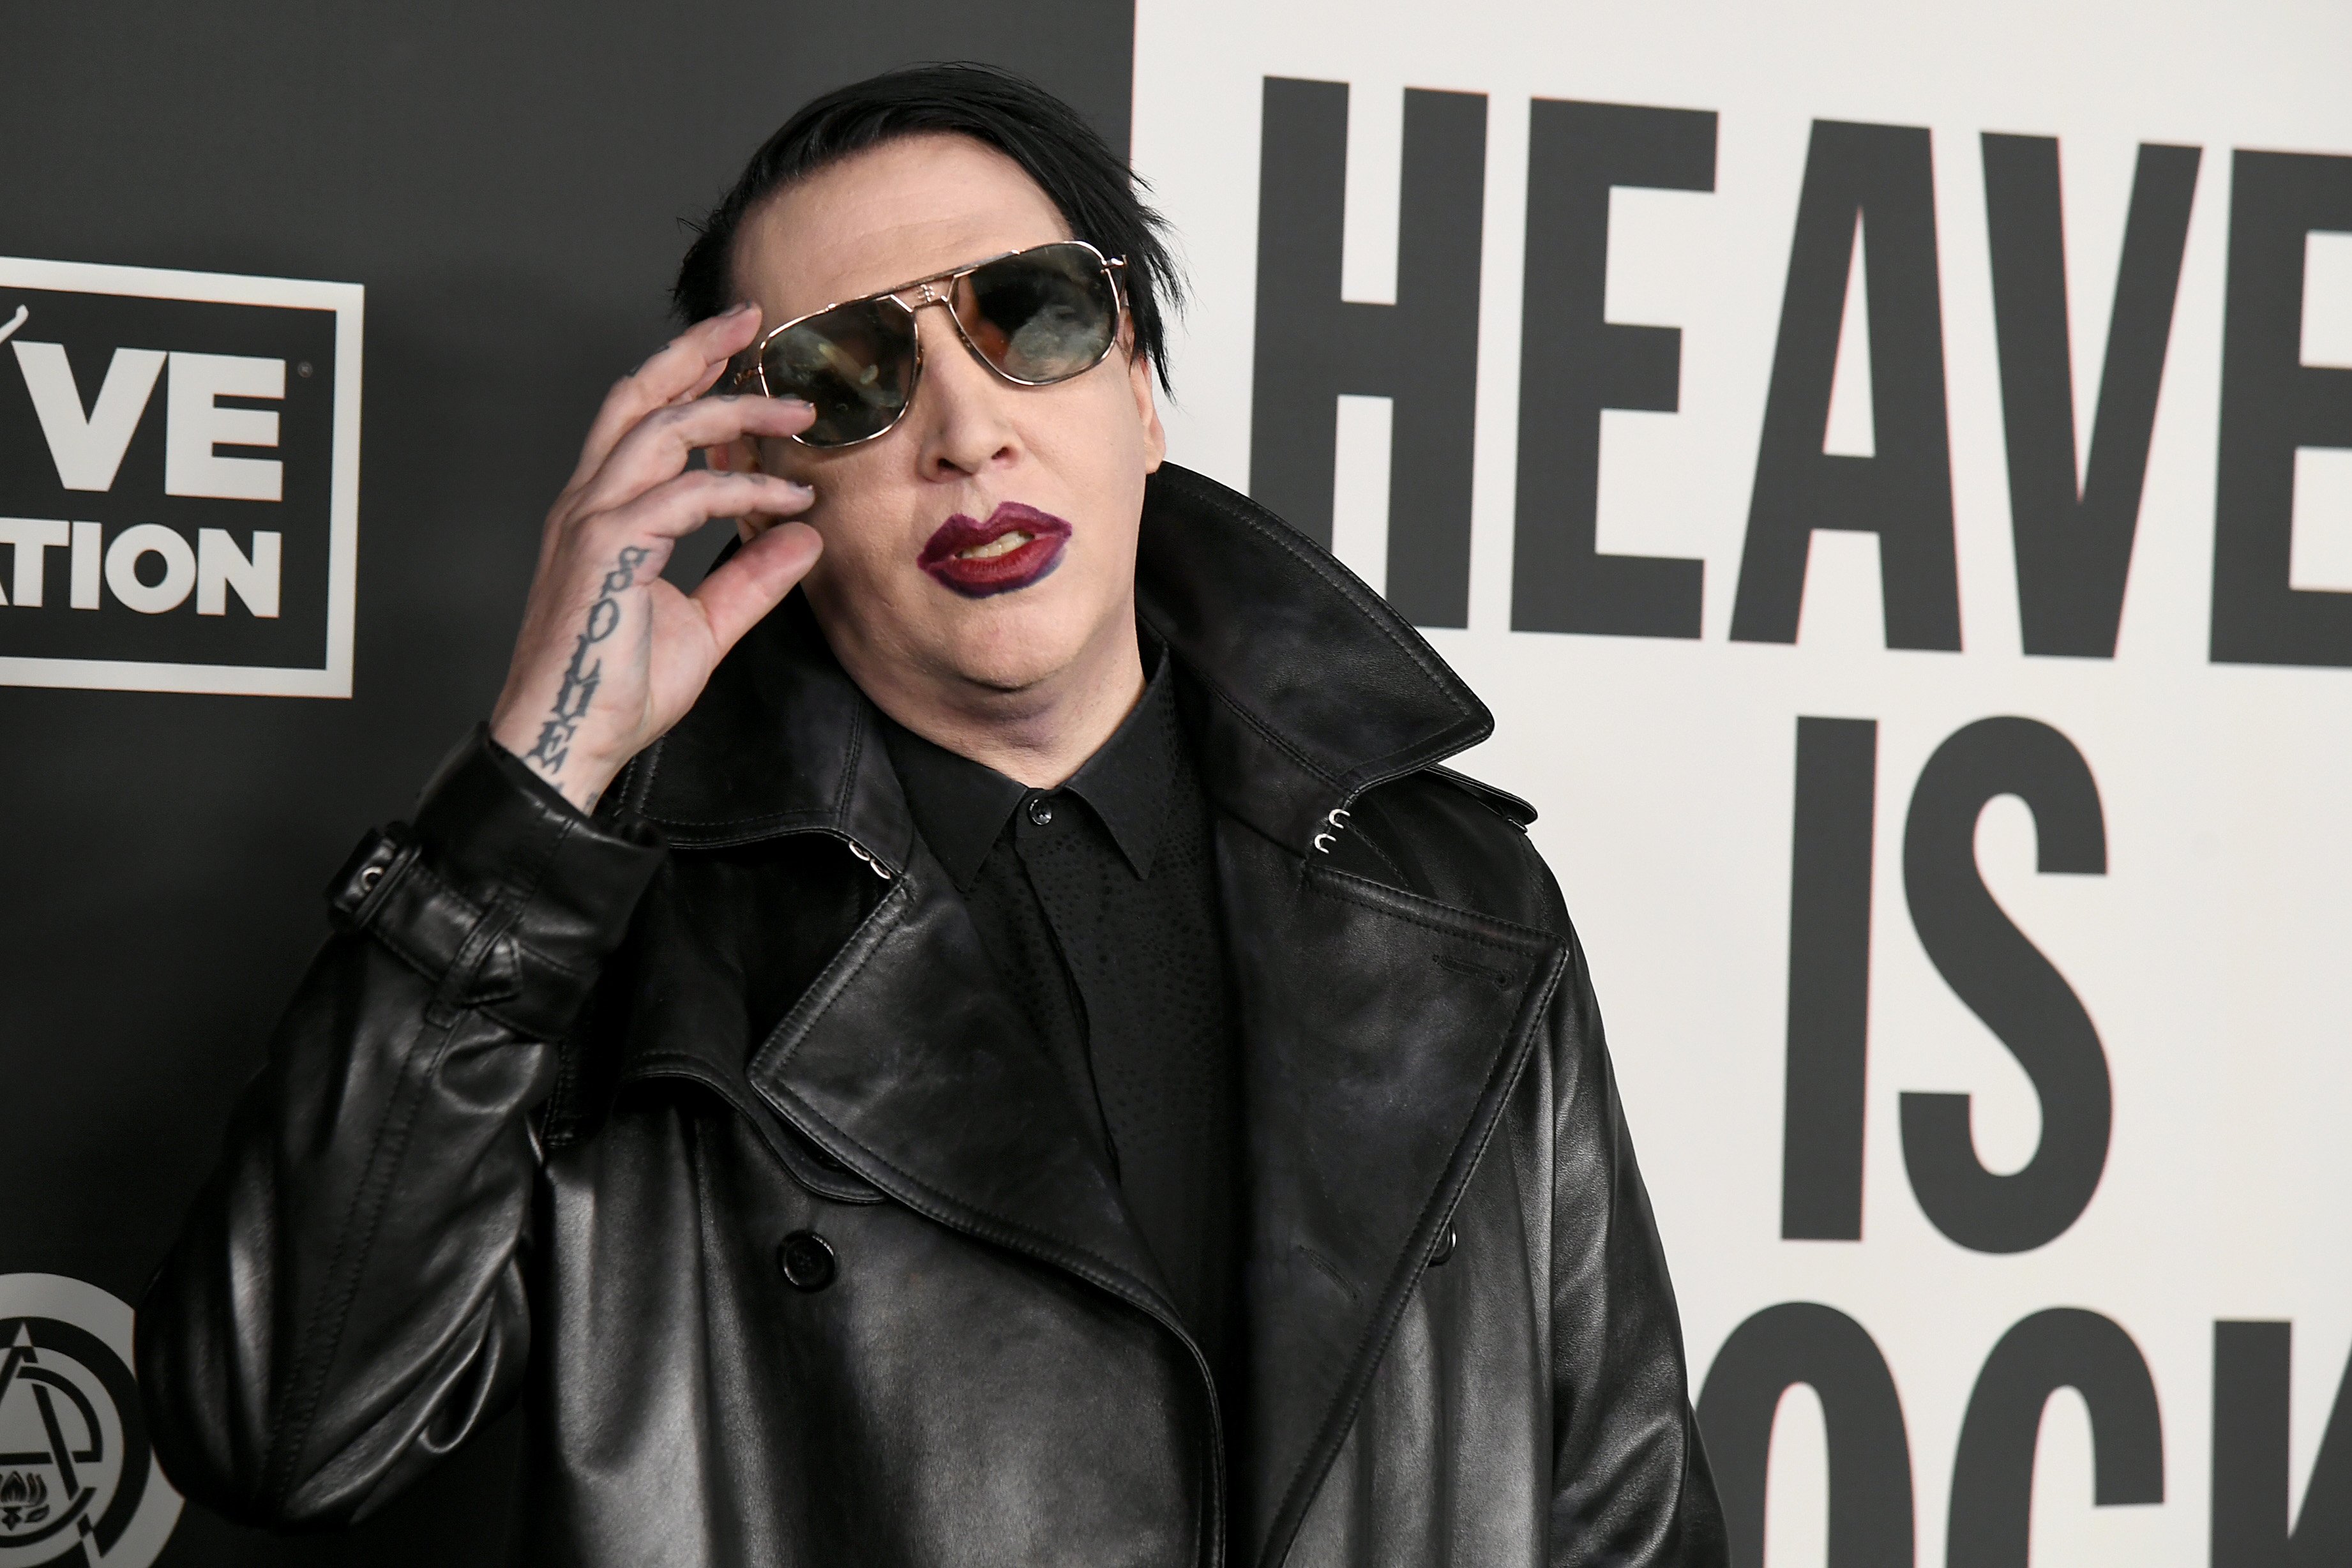 Marilyn Manson at The Art Of Elysium's 13th Annual Celebration - Heaven at Hollywood Palladium on January 04, 2020 in Los Angeles, California | Photo: Getty Images